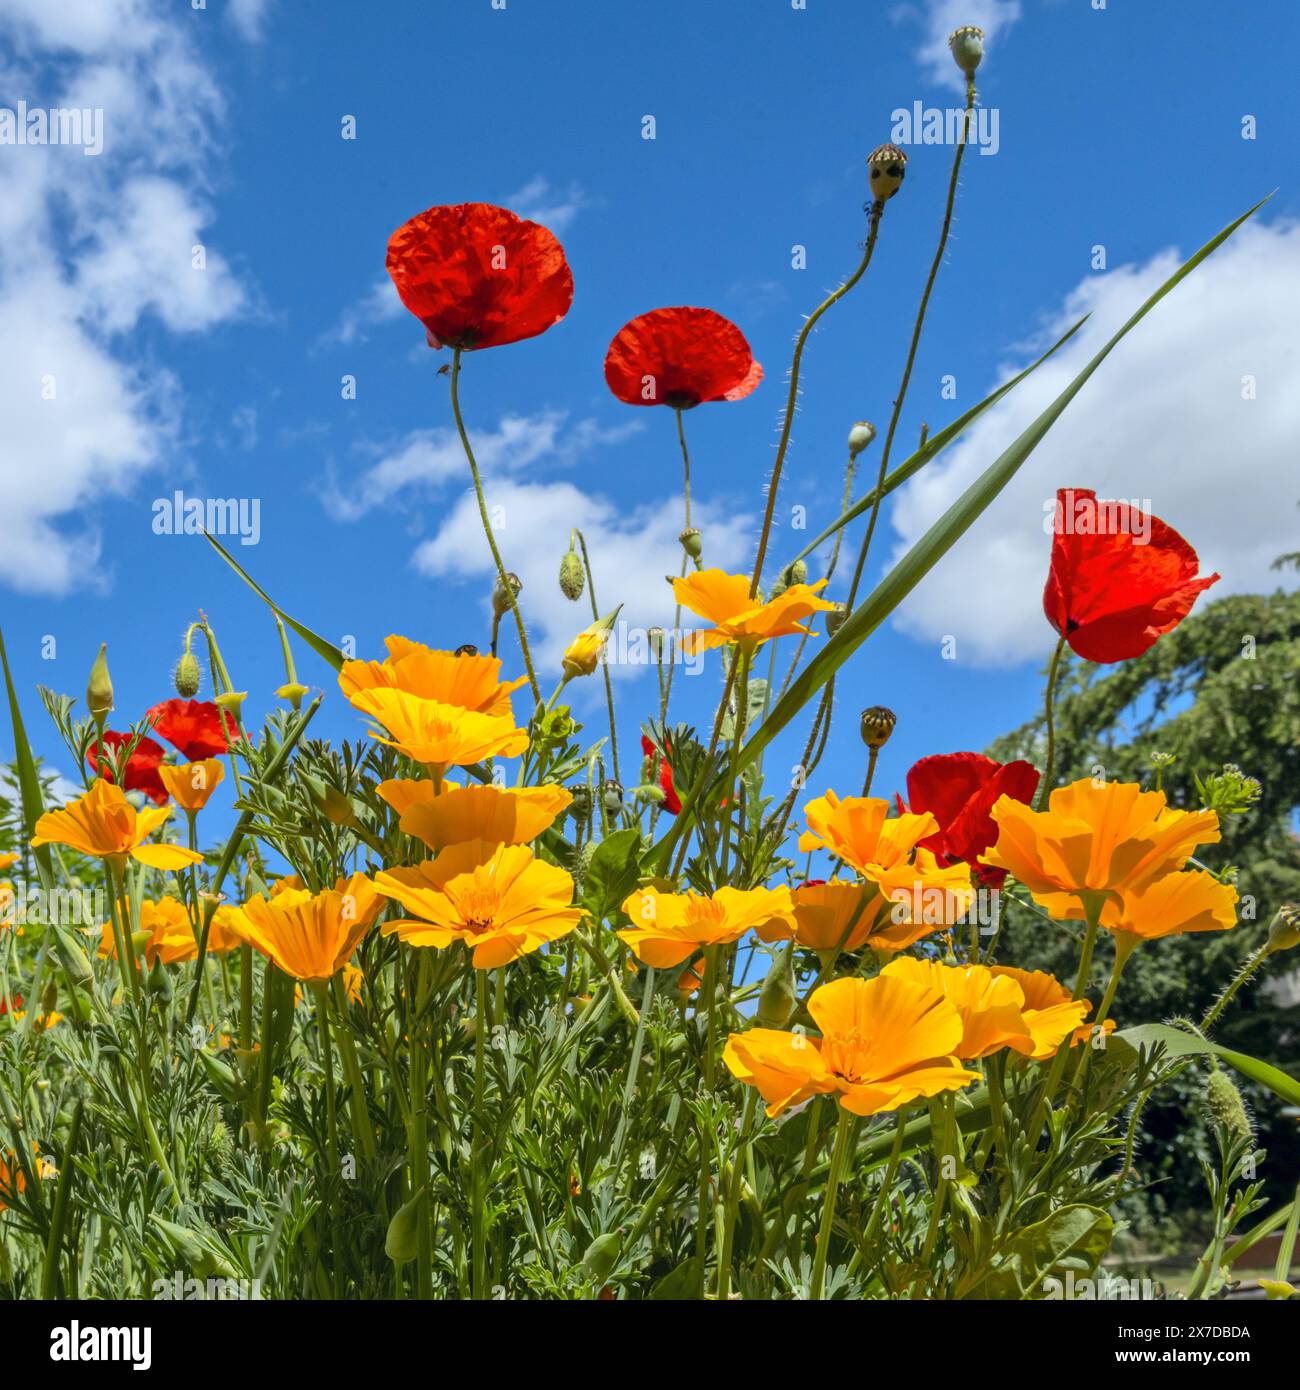 Golden Poppies California Poppies basking in the sun in a field Stock Photo